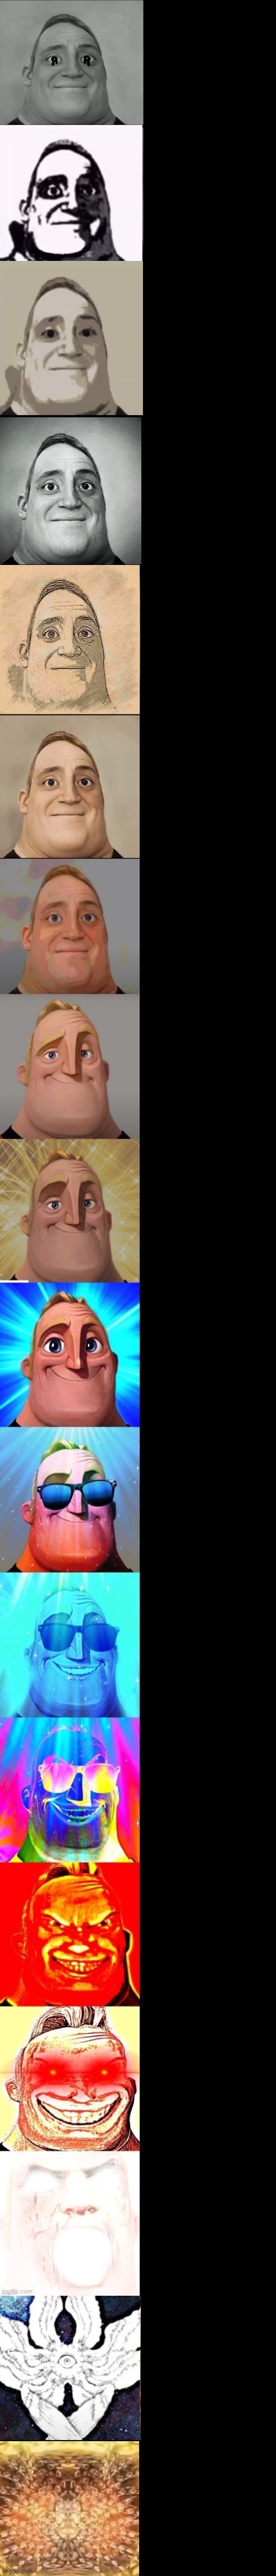 Mr incredible becoming grey to god Blank Meme Template